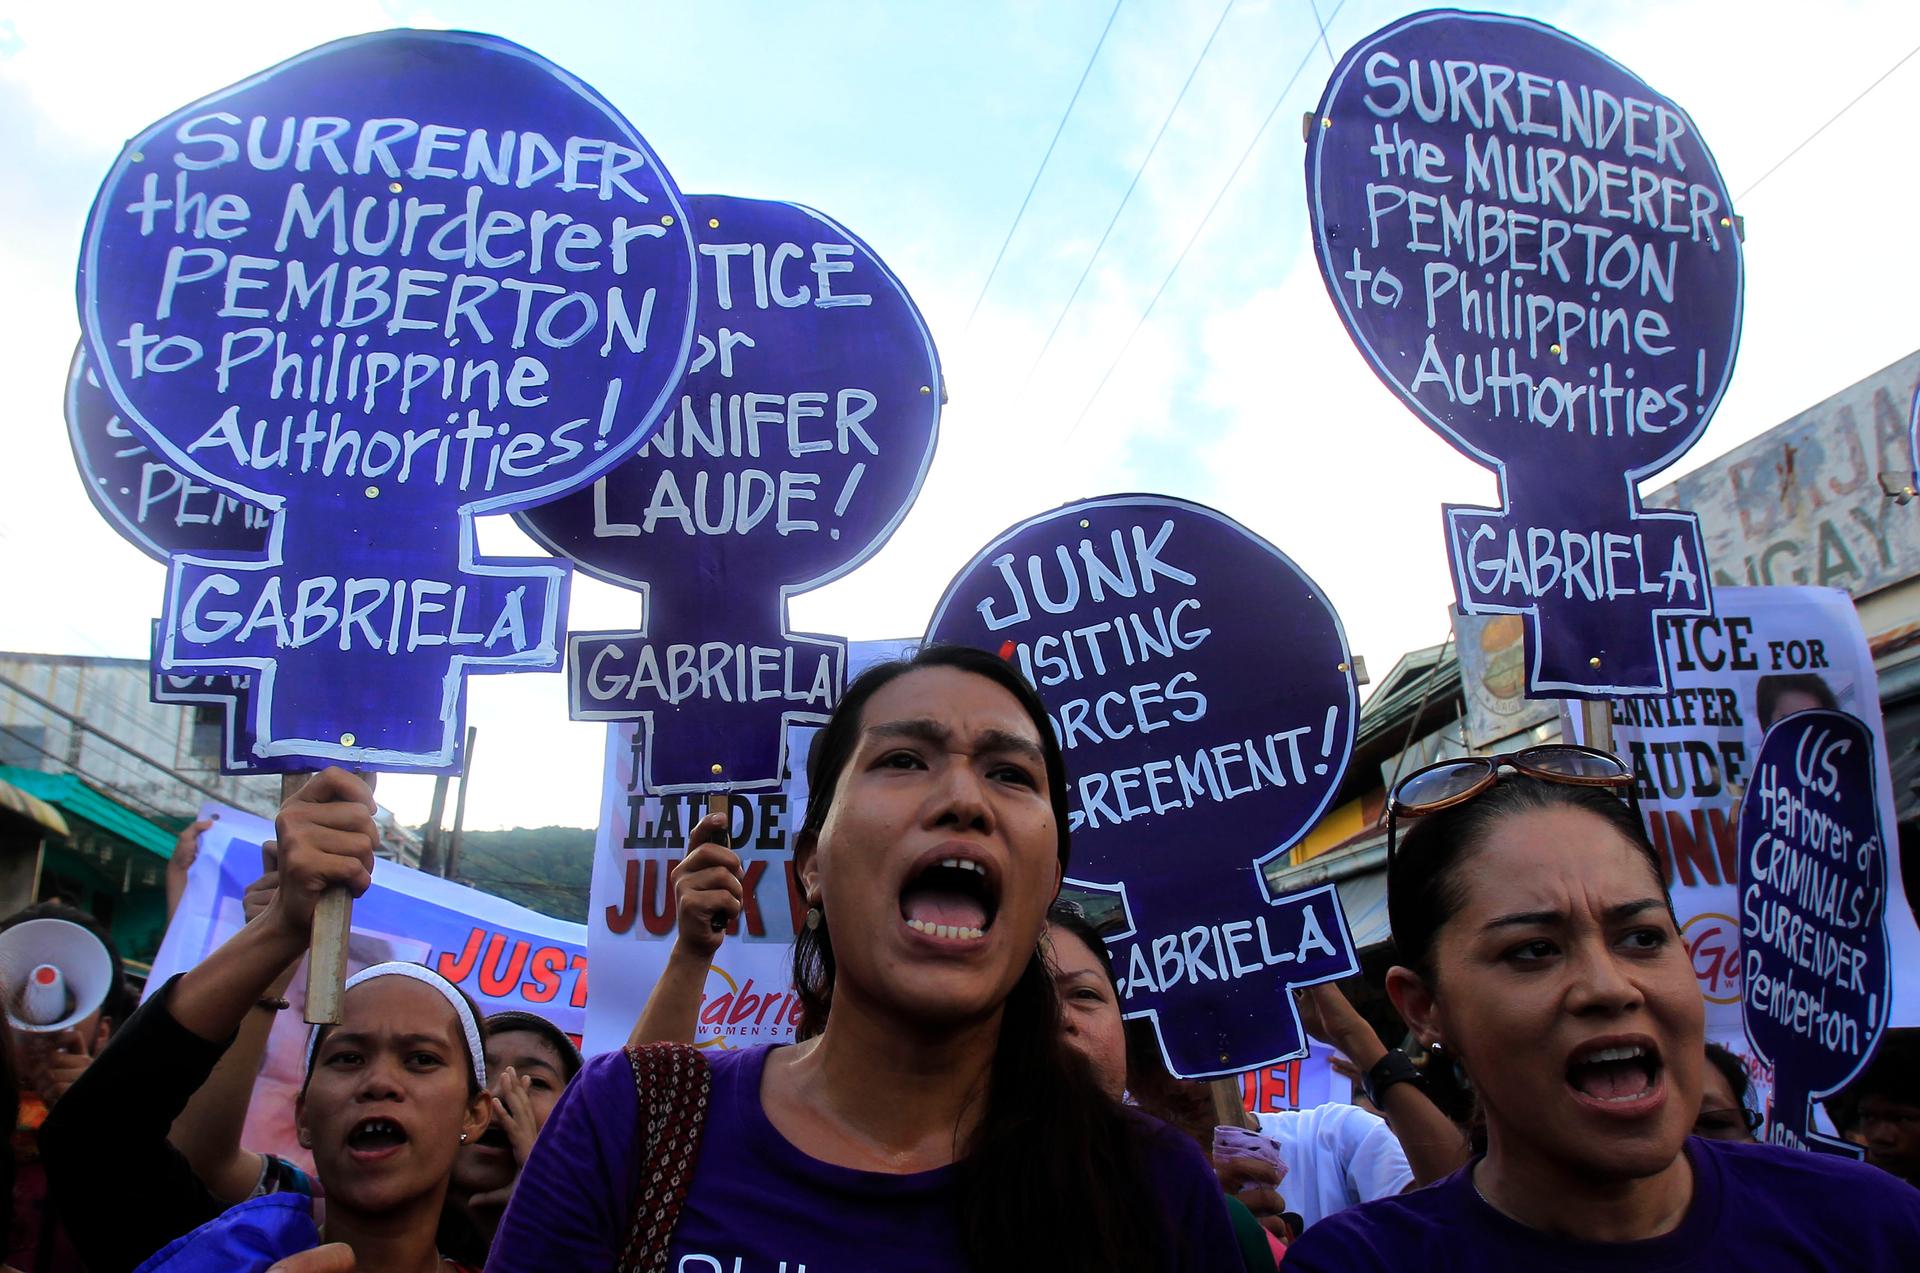 Members of the Gabriela Women's Party, a group advocating the rights of Filipino women, shout "Justice for slain transgender Jennifer Laude" during a protest in Olongapo City, north of Manila, on October 21, 2014. 